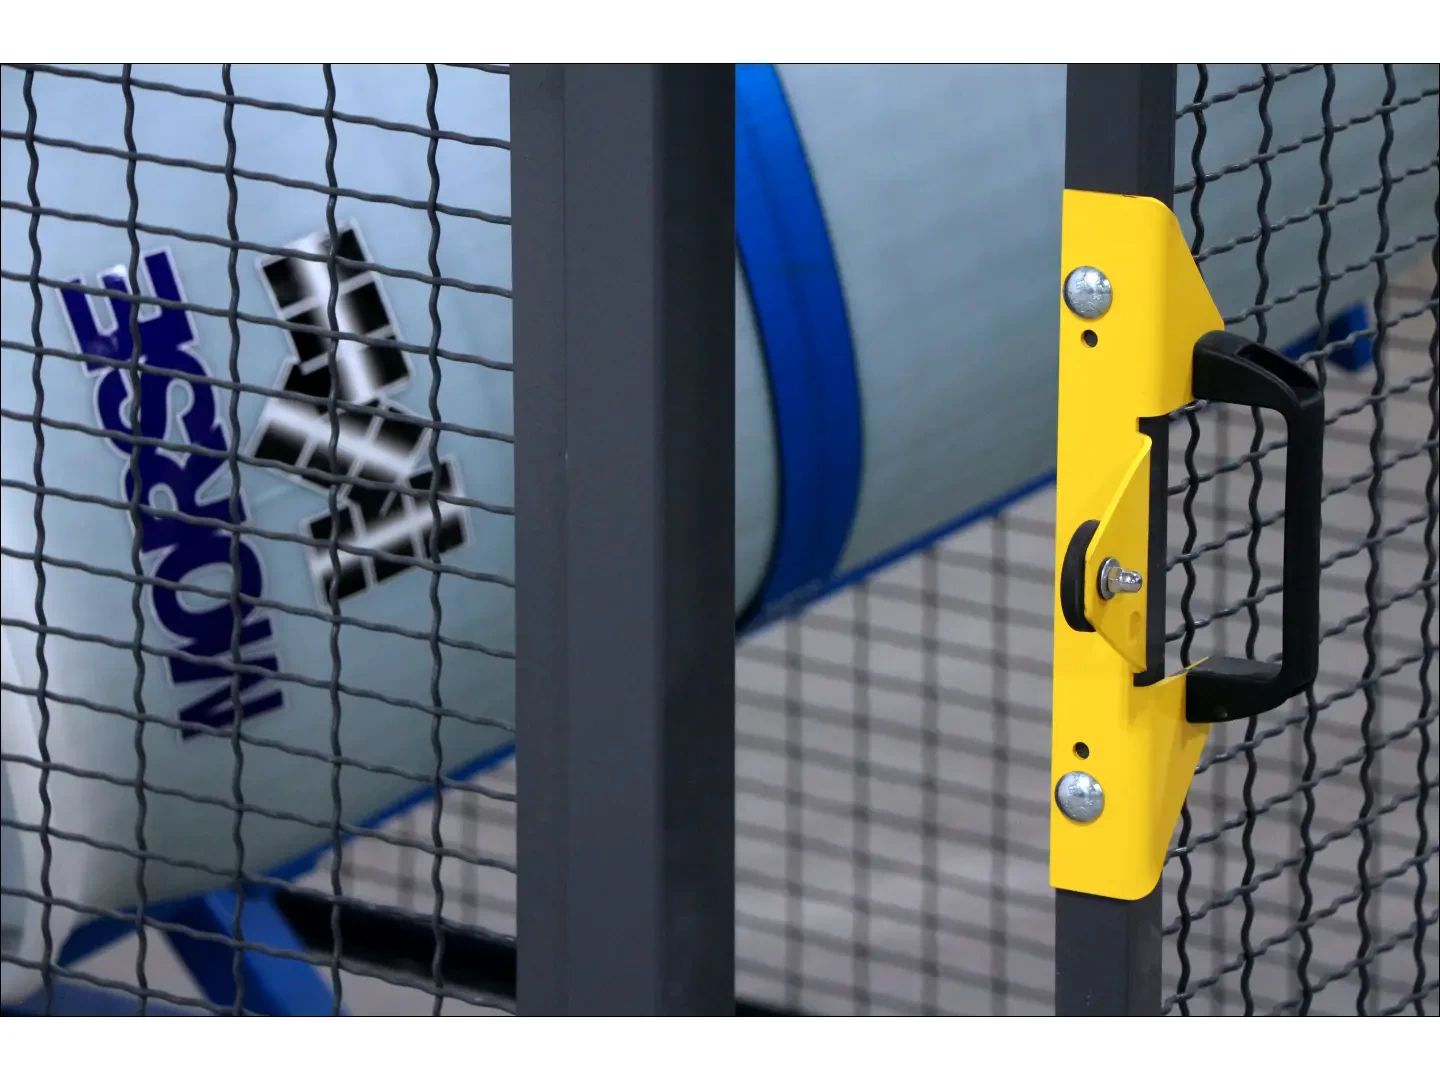 Enclosure with integrated safety interlock, in accordance with OSHA requirements, so the machine automatically shuts off when the enclosure is opened